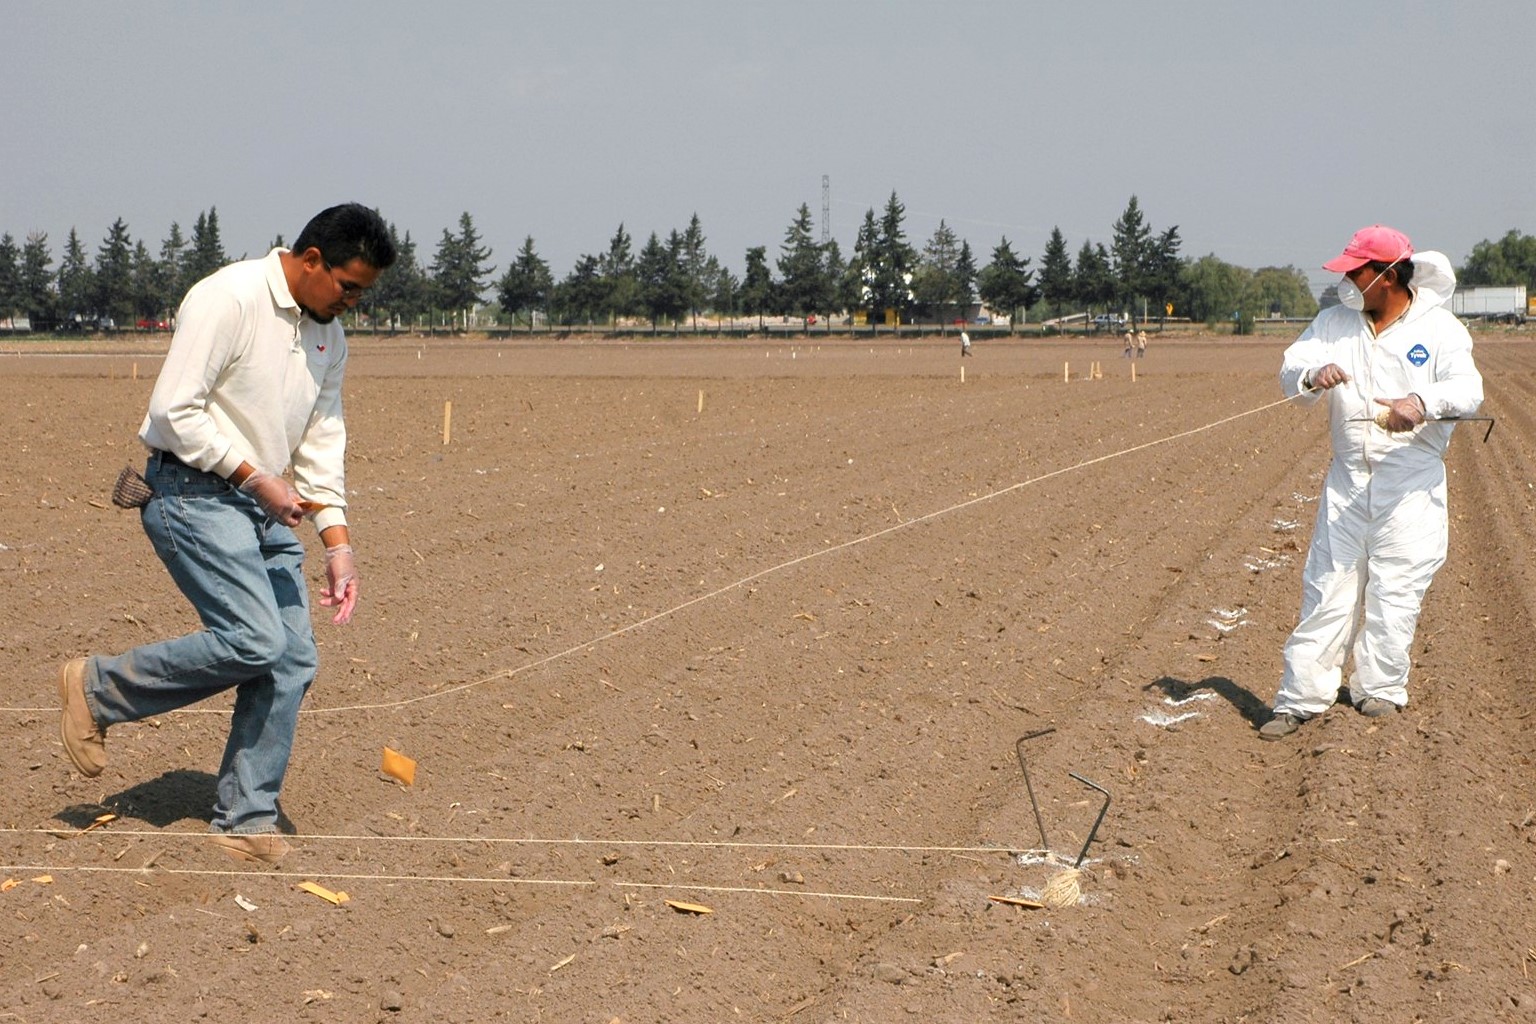 Laying out wheat trials for planting. Credit: CIMMYT